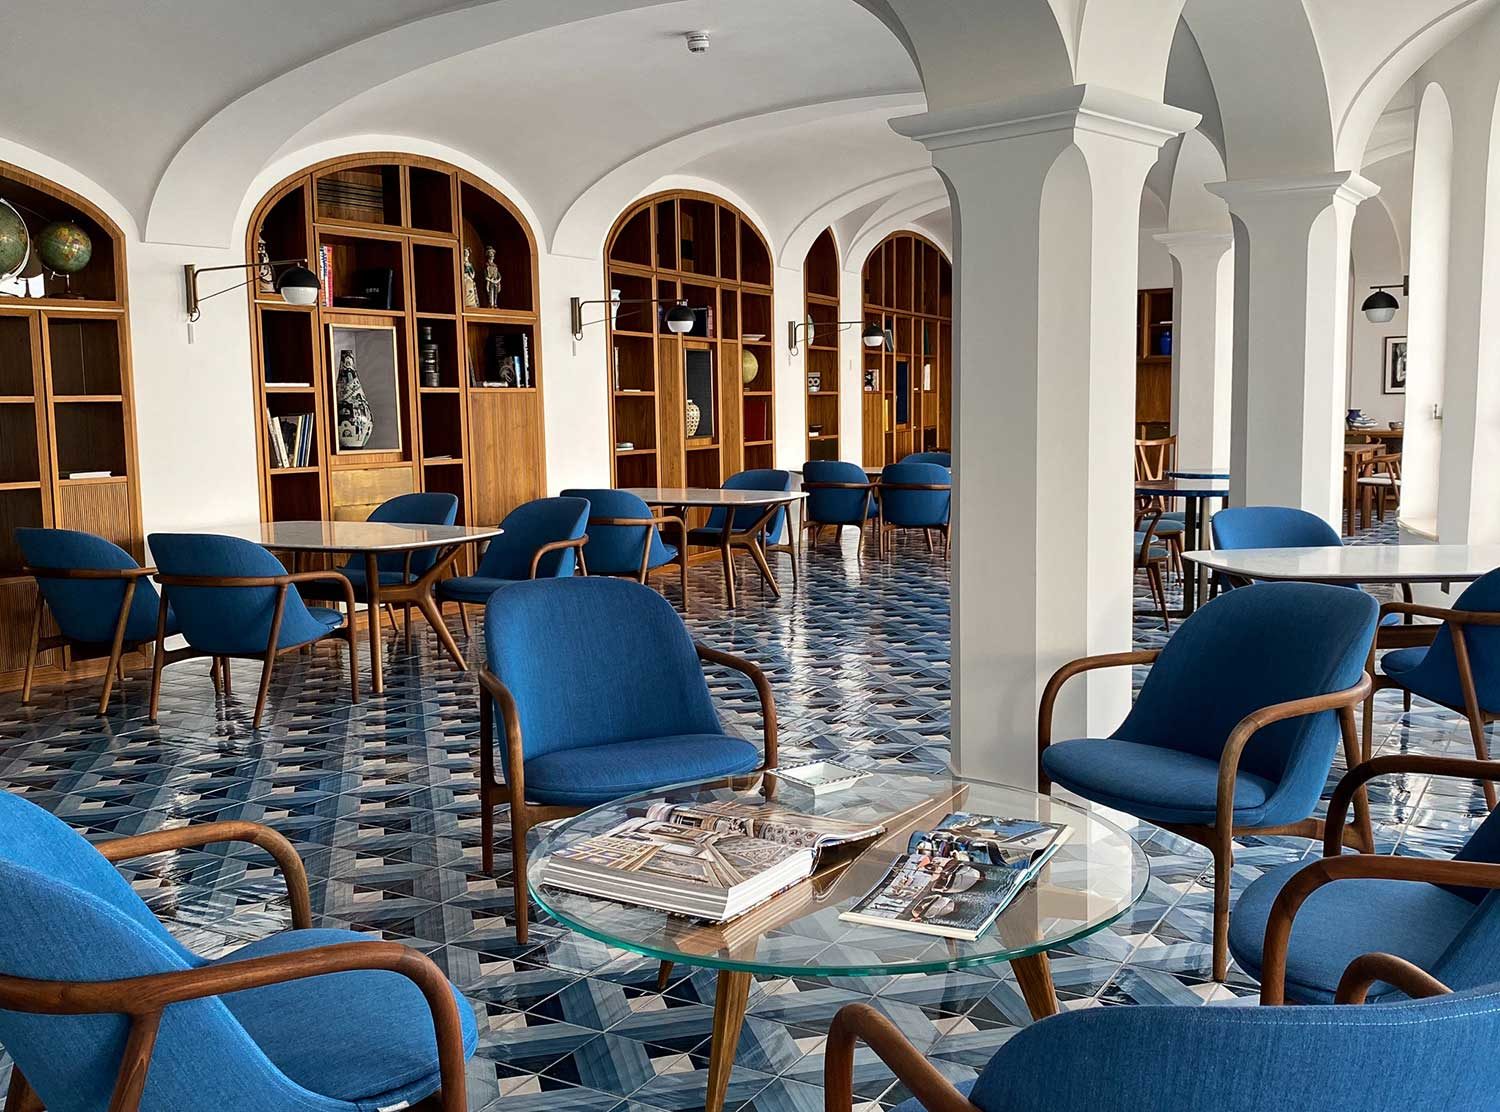 Borgo Santandrea The hotel is a design lovers paradise, showcasing a a well-crafted mix of local artisanship alongside highly recognized Italian brands 